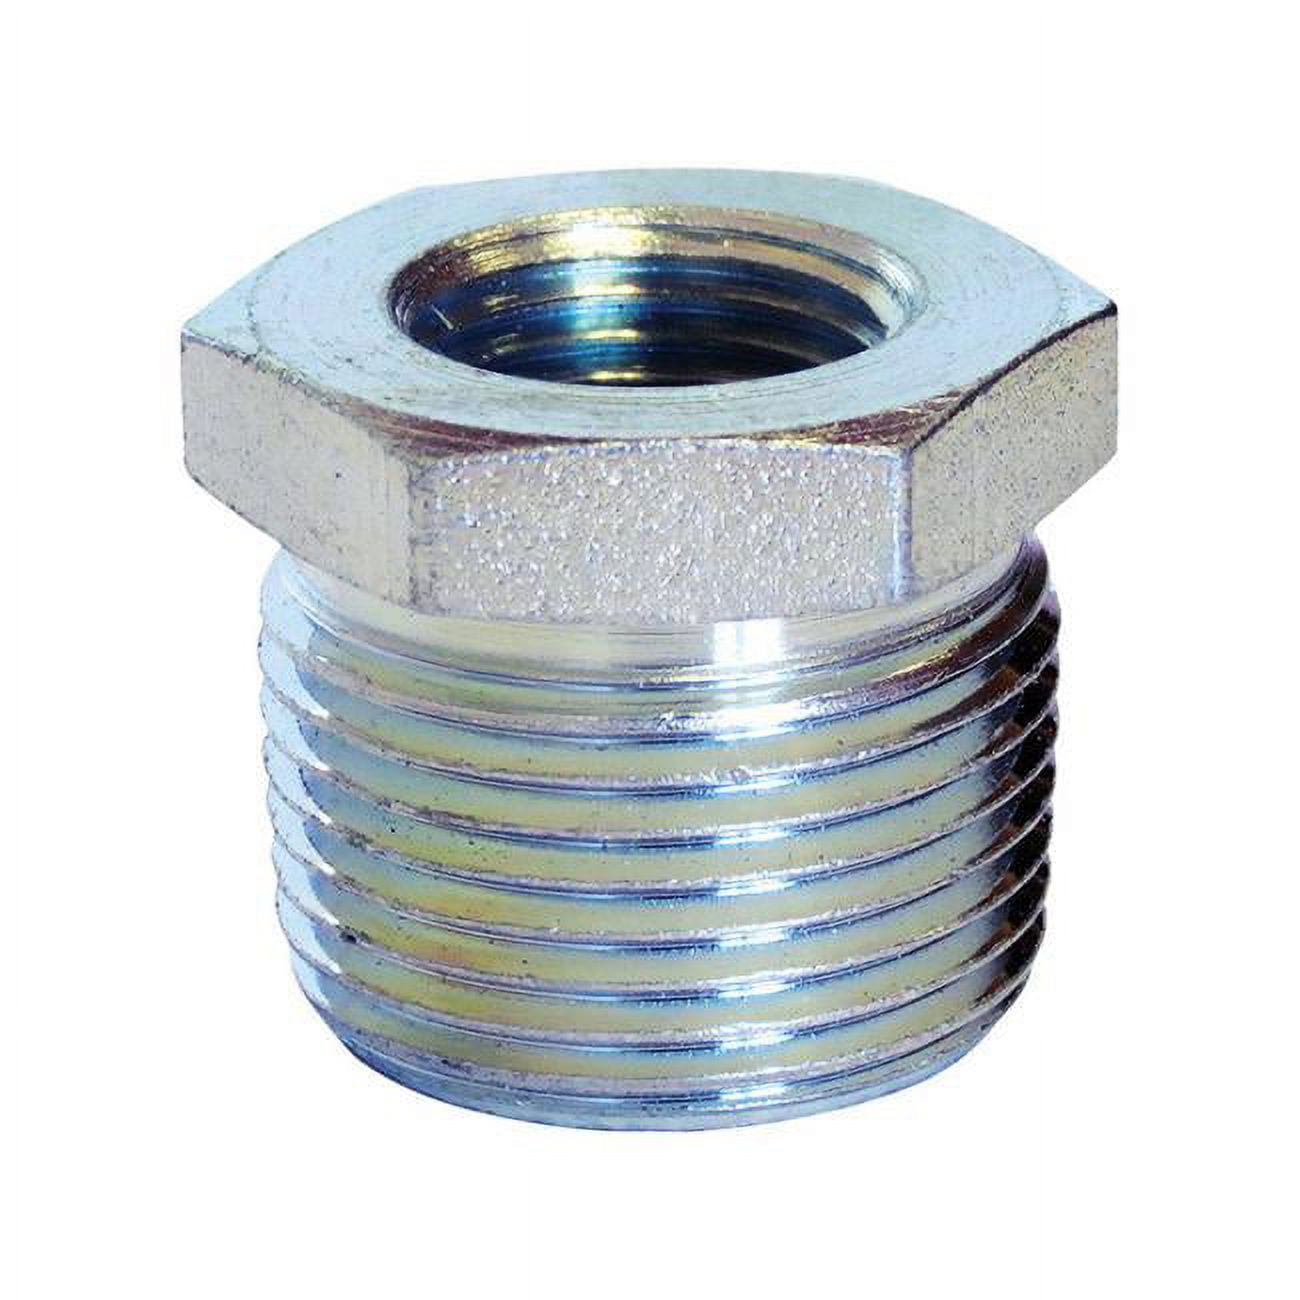 Anvil 4806923 0.75 In. Mpt X 0.25 In. Dia. Schedule 40 Fpt Galvanized Hex Bushing